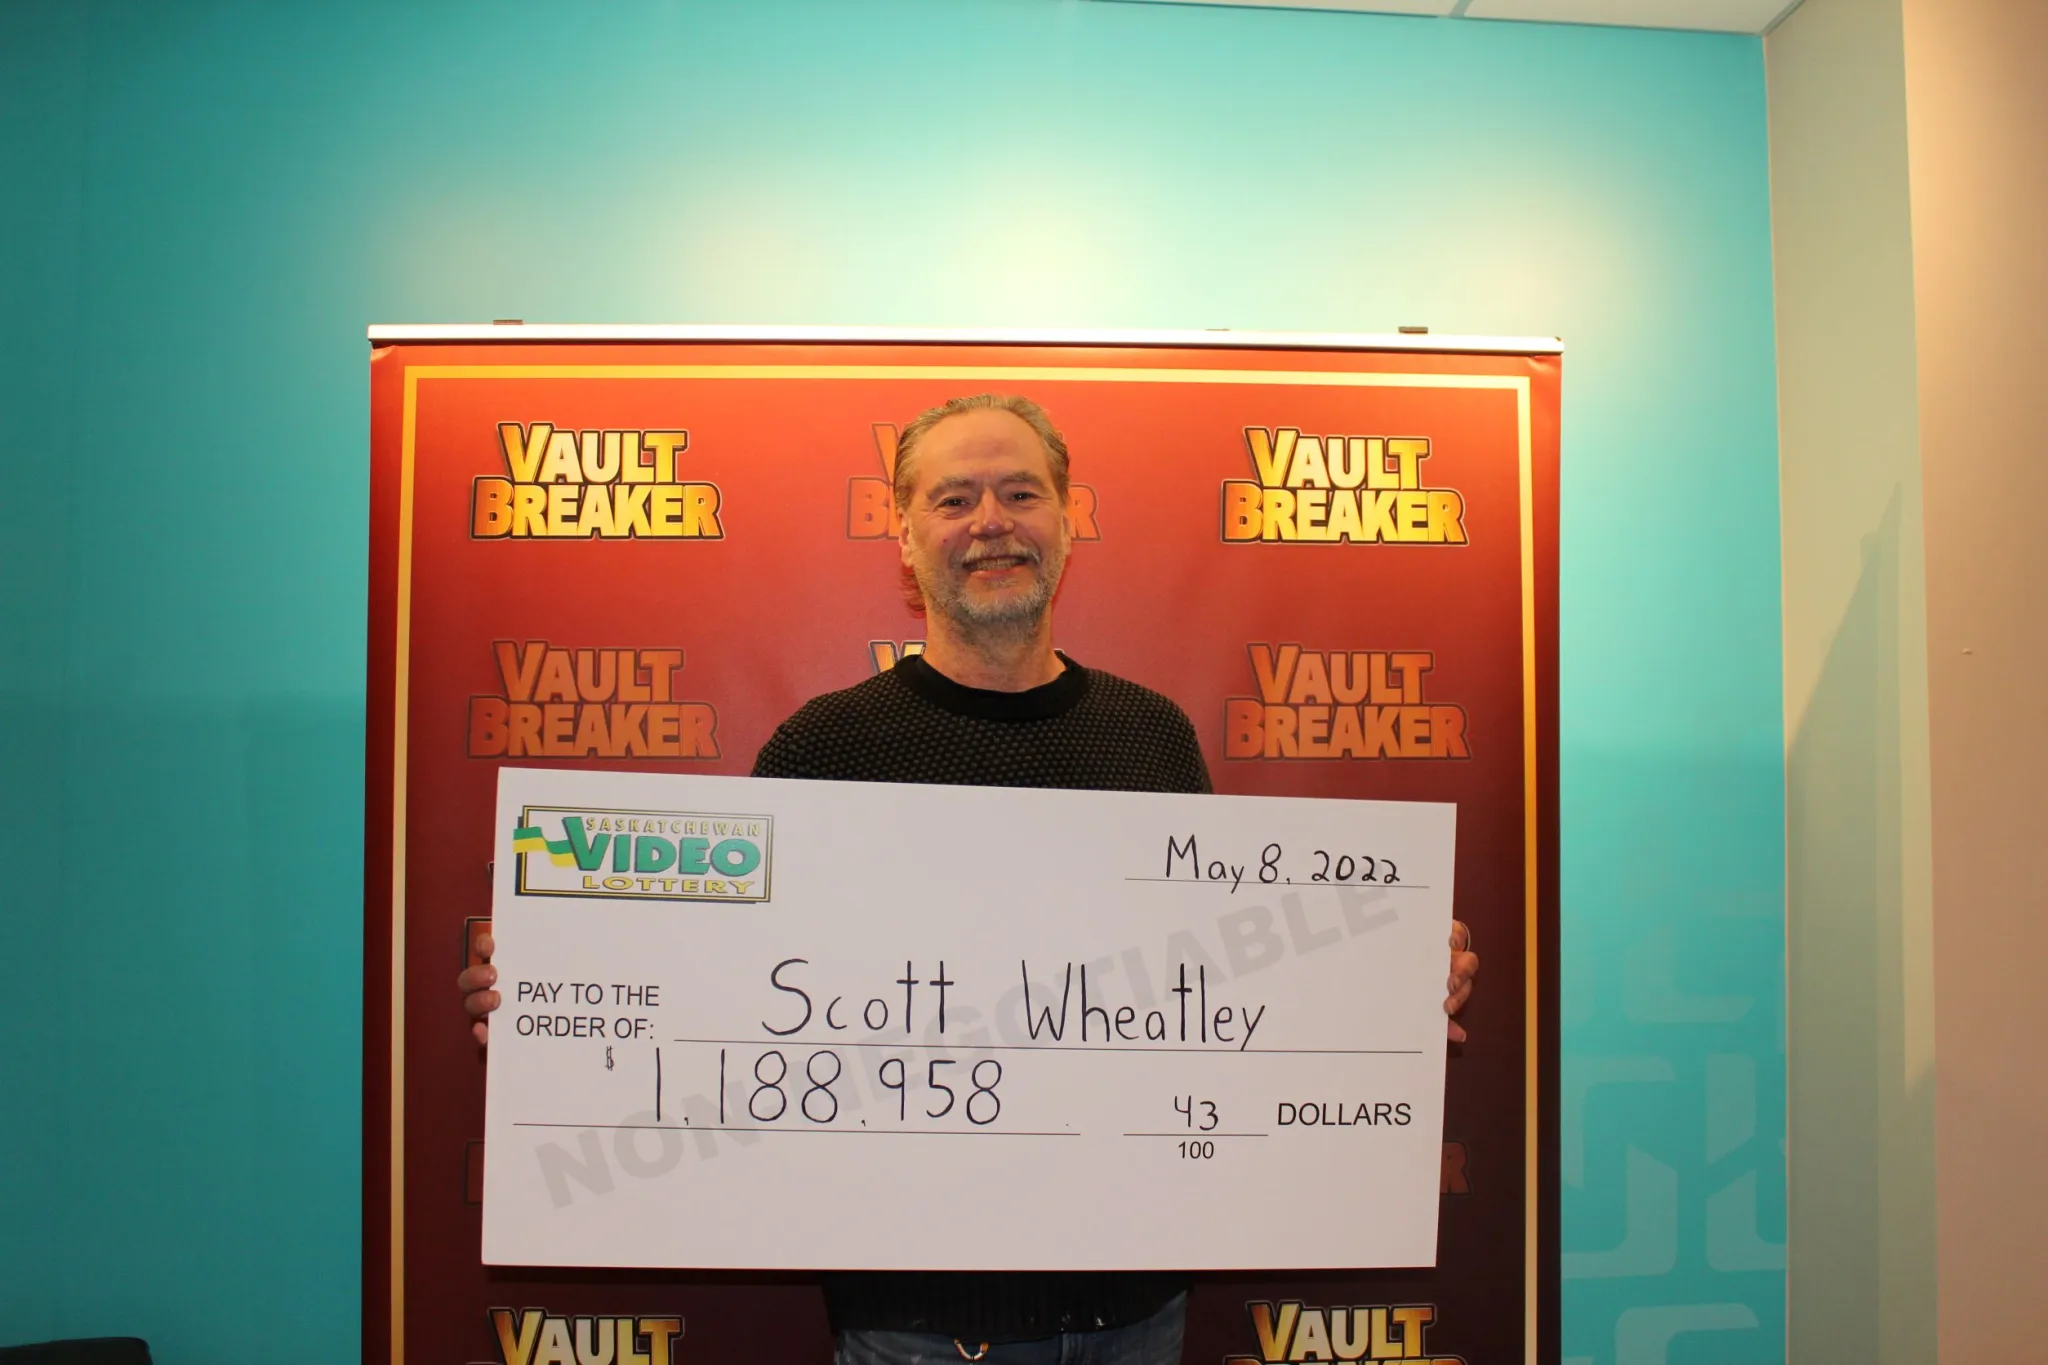 Scott Wheatley won the Vault Breaker jackpot of $1.1 million dollars at a VLT machine at the Four Season's sports bar. The jackpot is now reset to $500,000. Photo supplied: Western Canada Lottery Corporation